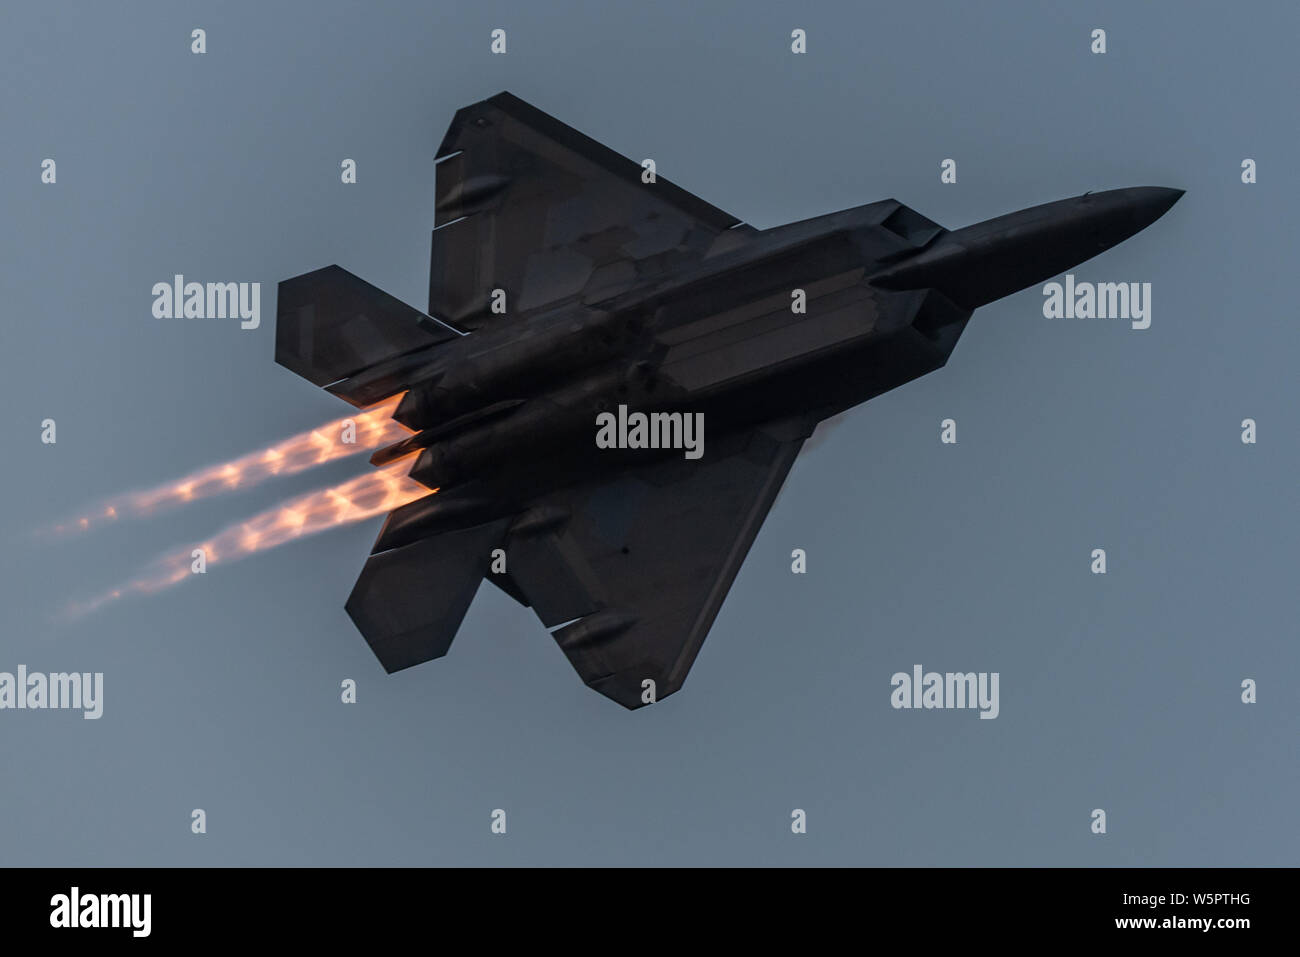 U.S. Air Force Maj. Paul Lopez, F-22 Demo Team commander, flies a twilight demonstration during EAA AirVenture in Oshkosh, Wis., July 28, 2019.  Founded in 2007, the F-22 Raptor Demo Team showcases the unique capabilities of the world's premier 5th-generation fighter aircraft. (U.S. Air Force photo by 2nd Lt. Samuel Eckholm) Stock Photo